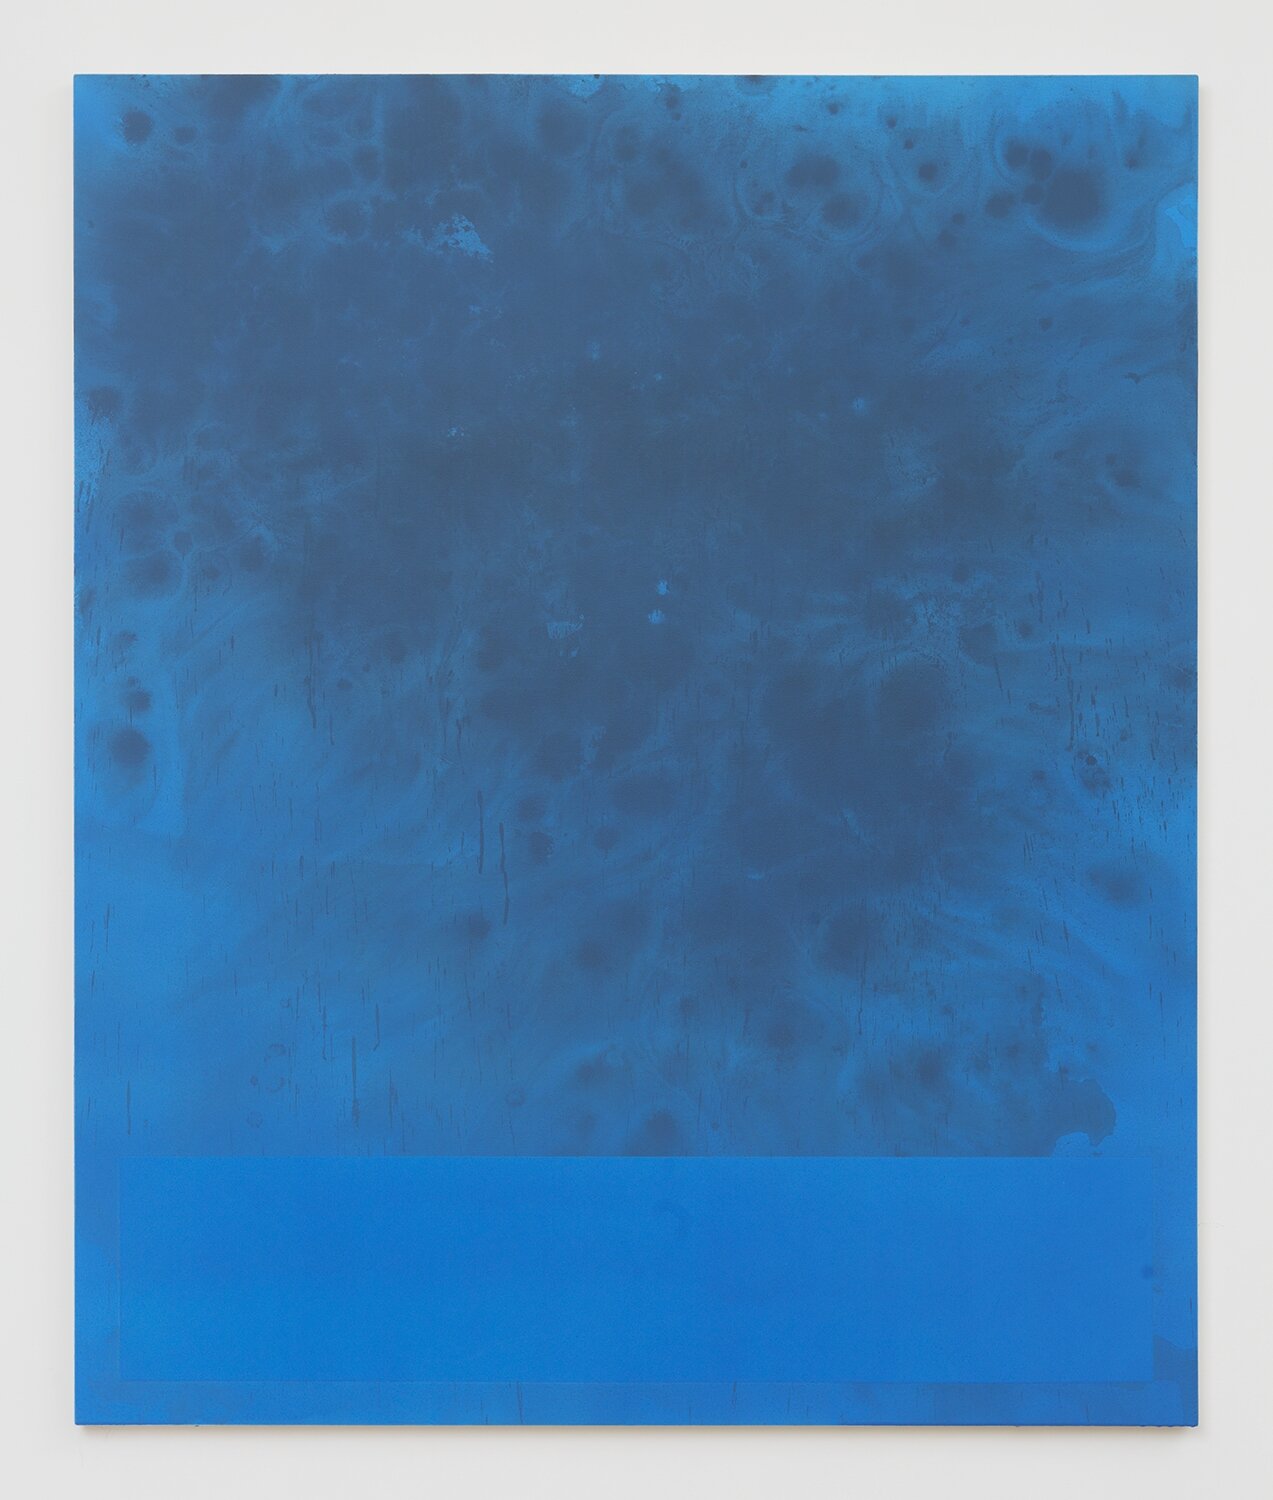   Untitled Painting In Cerulean,  2014. Acrylic on canvas. 60 x 50 inches   